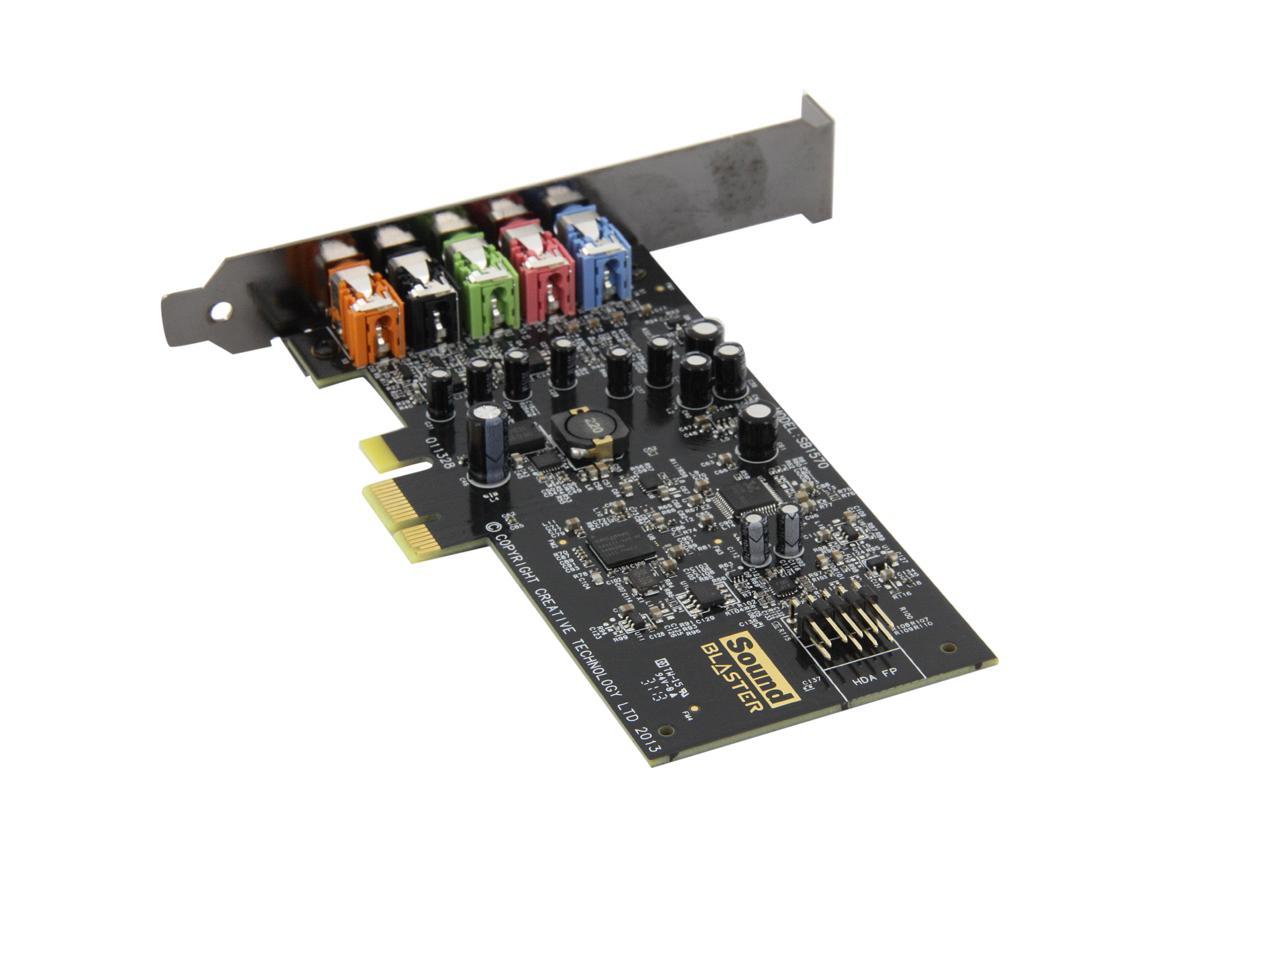 creative sound blaster audigy fx pcie 5.1 sound card with high performance headphone amp